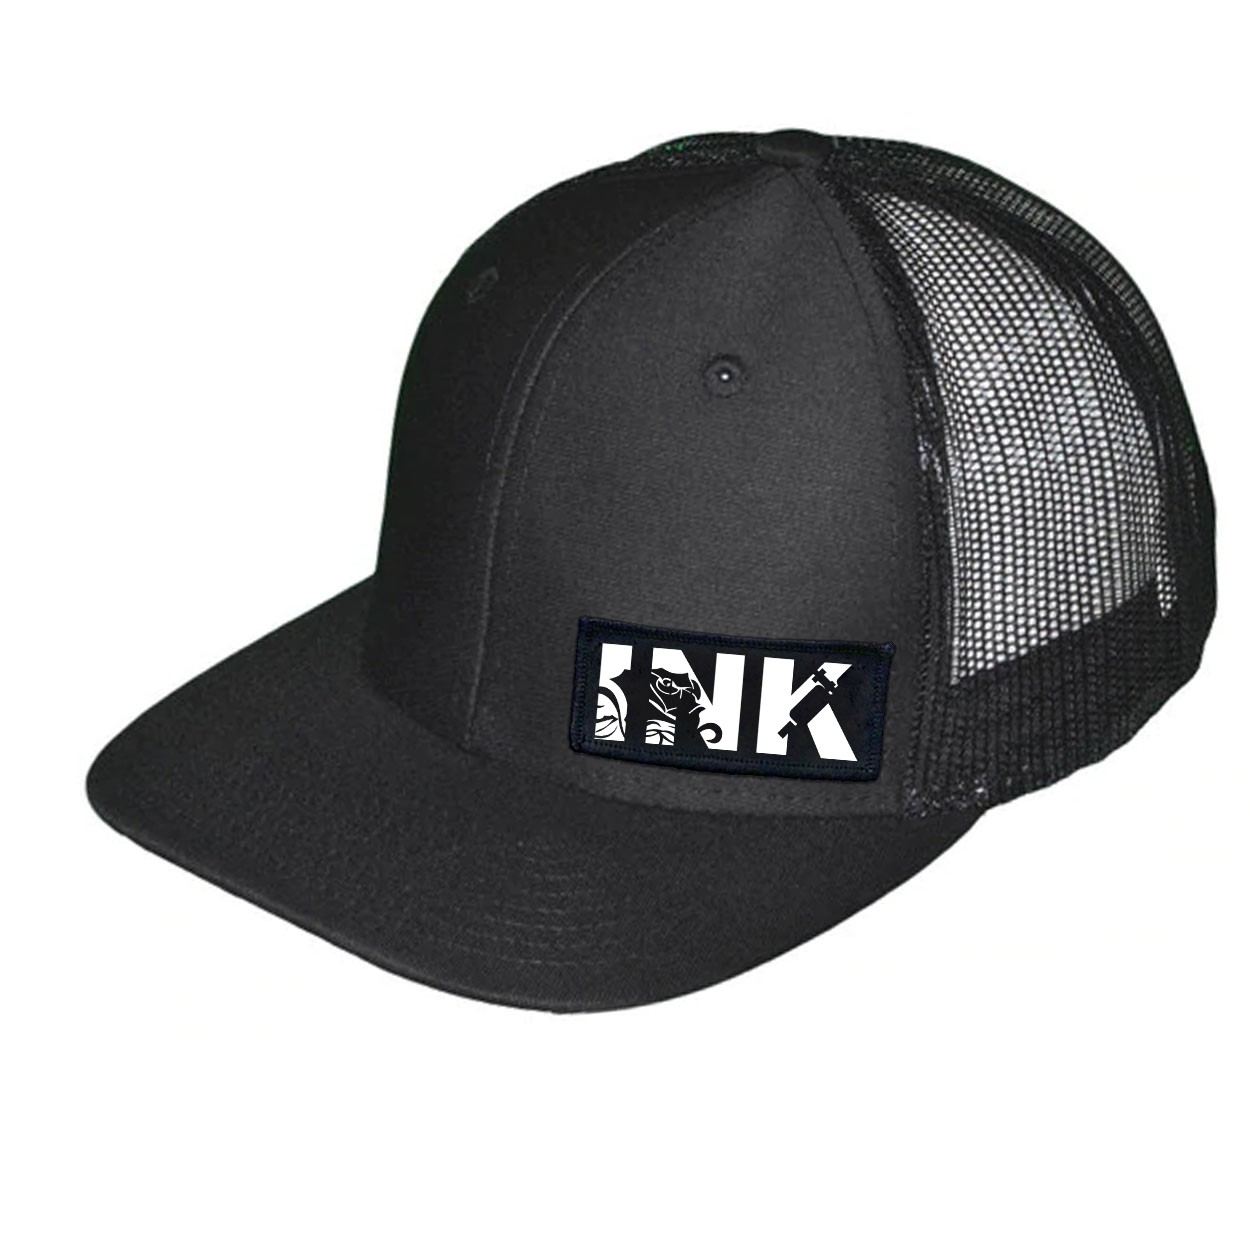 Ink Tattoo Logo Night Out Woven Patch Snapback Trucker Hat Black (White Logo)